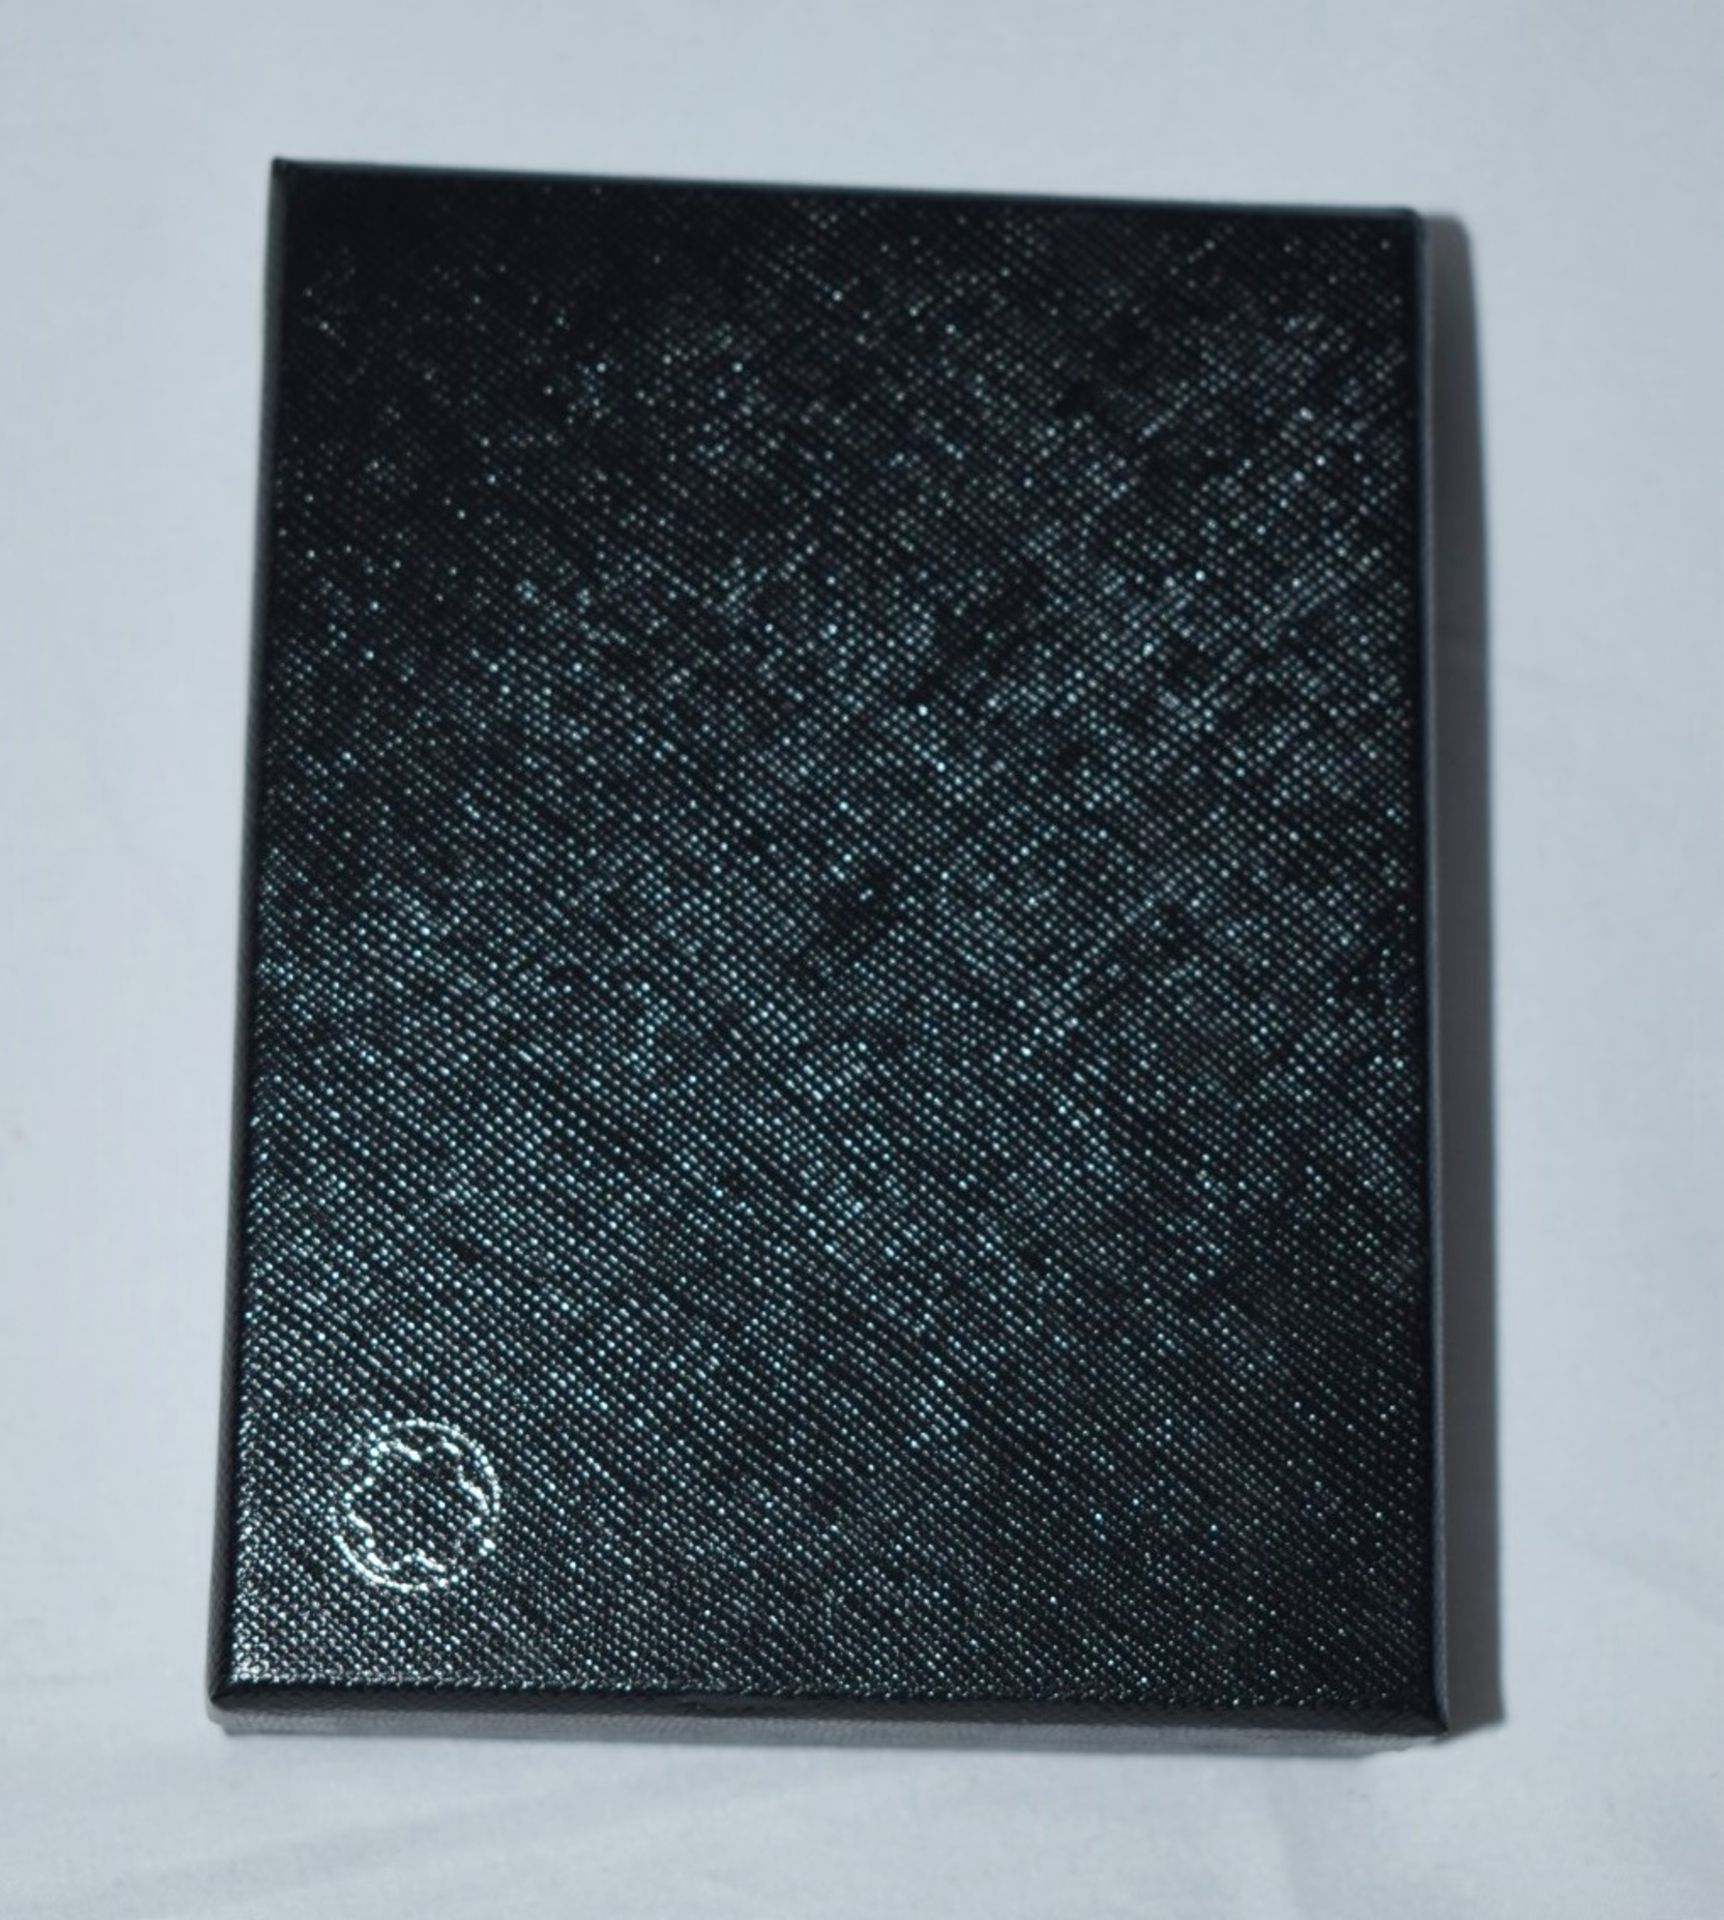 1 x MONTBLANC Sartorial Blue Luxury Leather Card Holder - Original Price £160.00 - Boxed Stock - Image 7 of 10